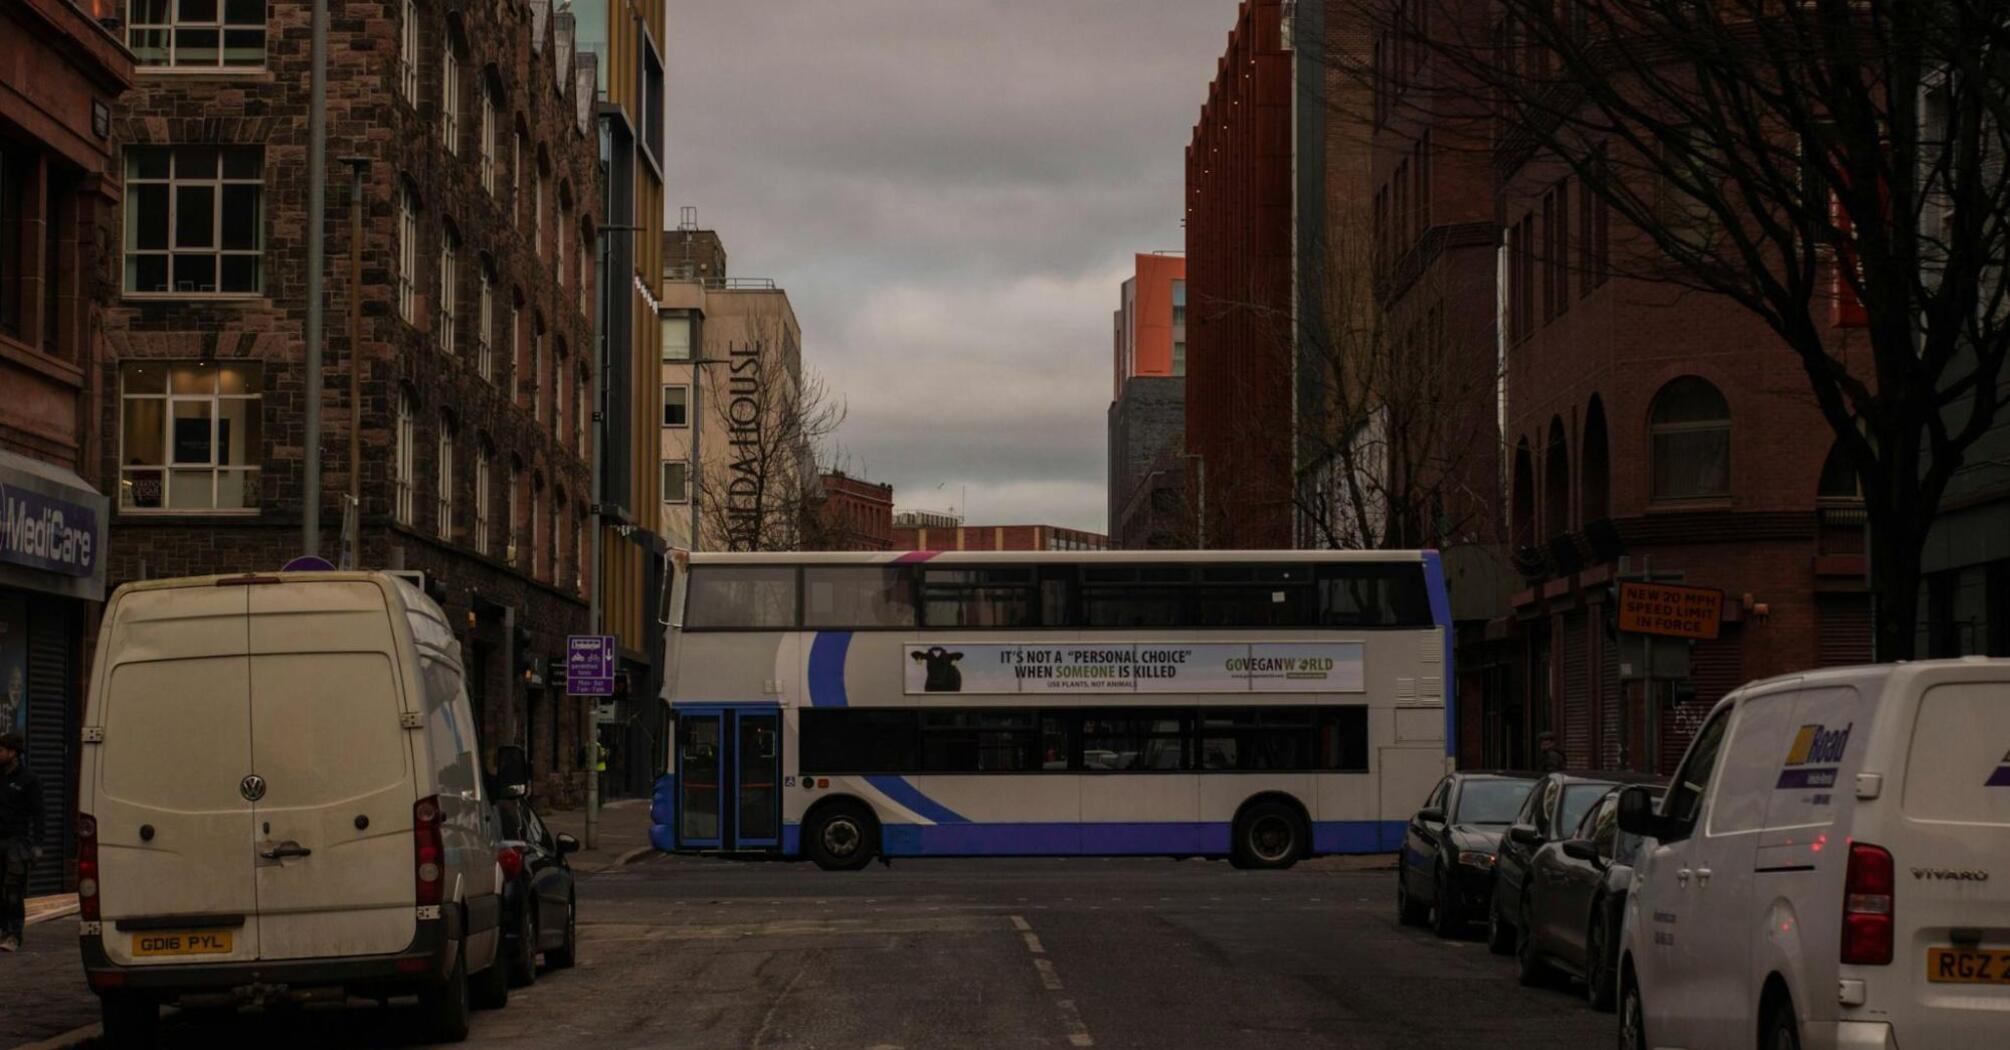 A city bus passes through a street lined with buildings, with a cloudy sky overhead